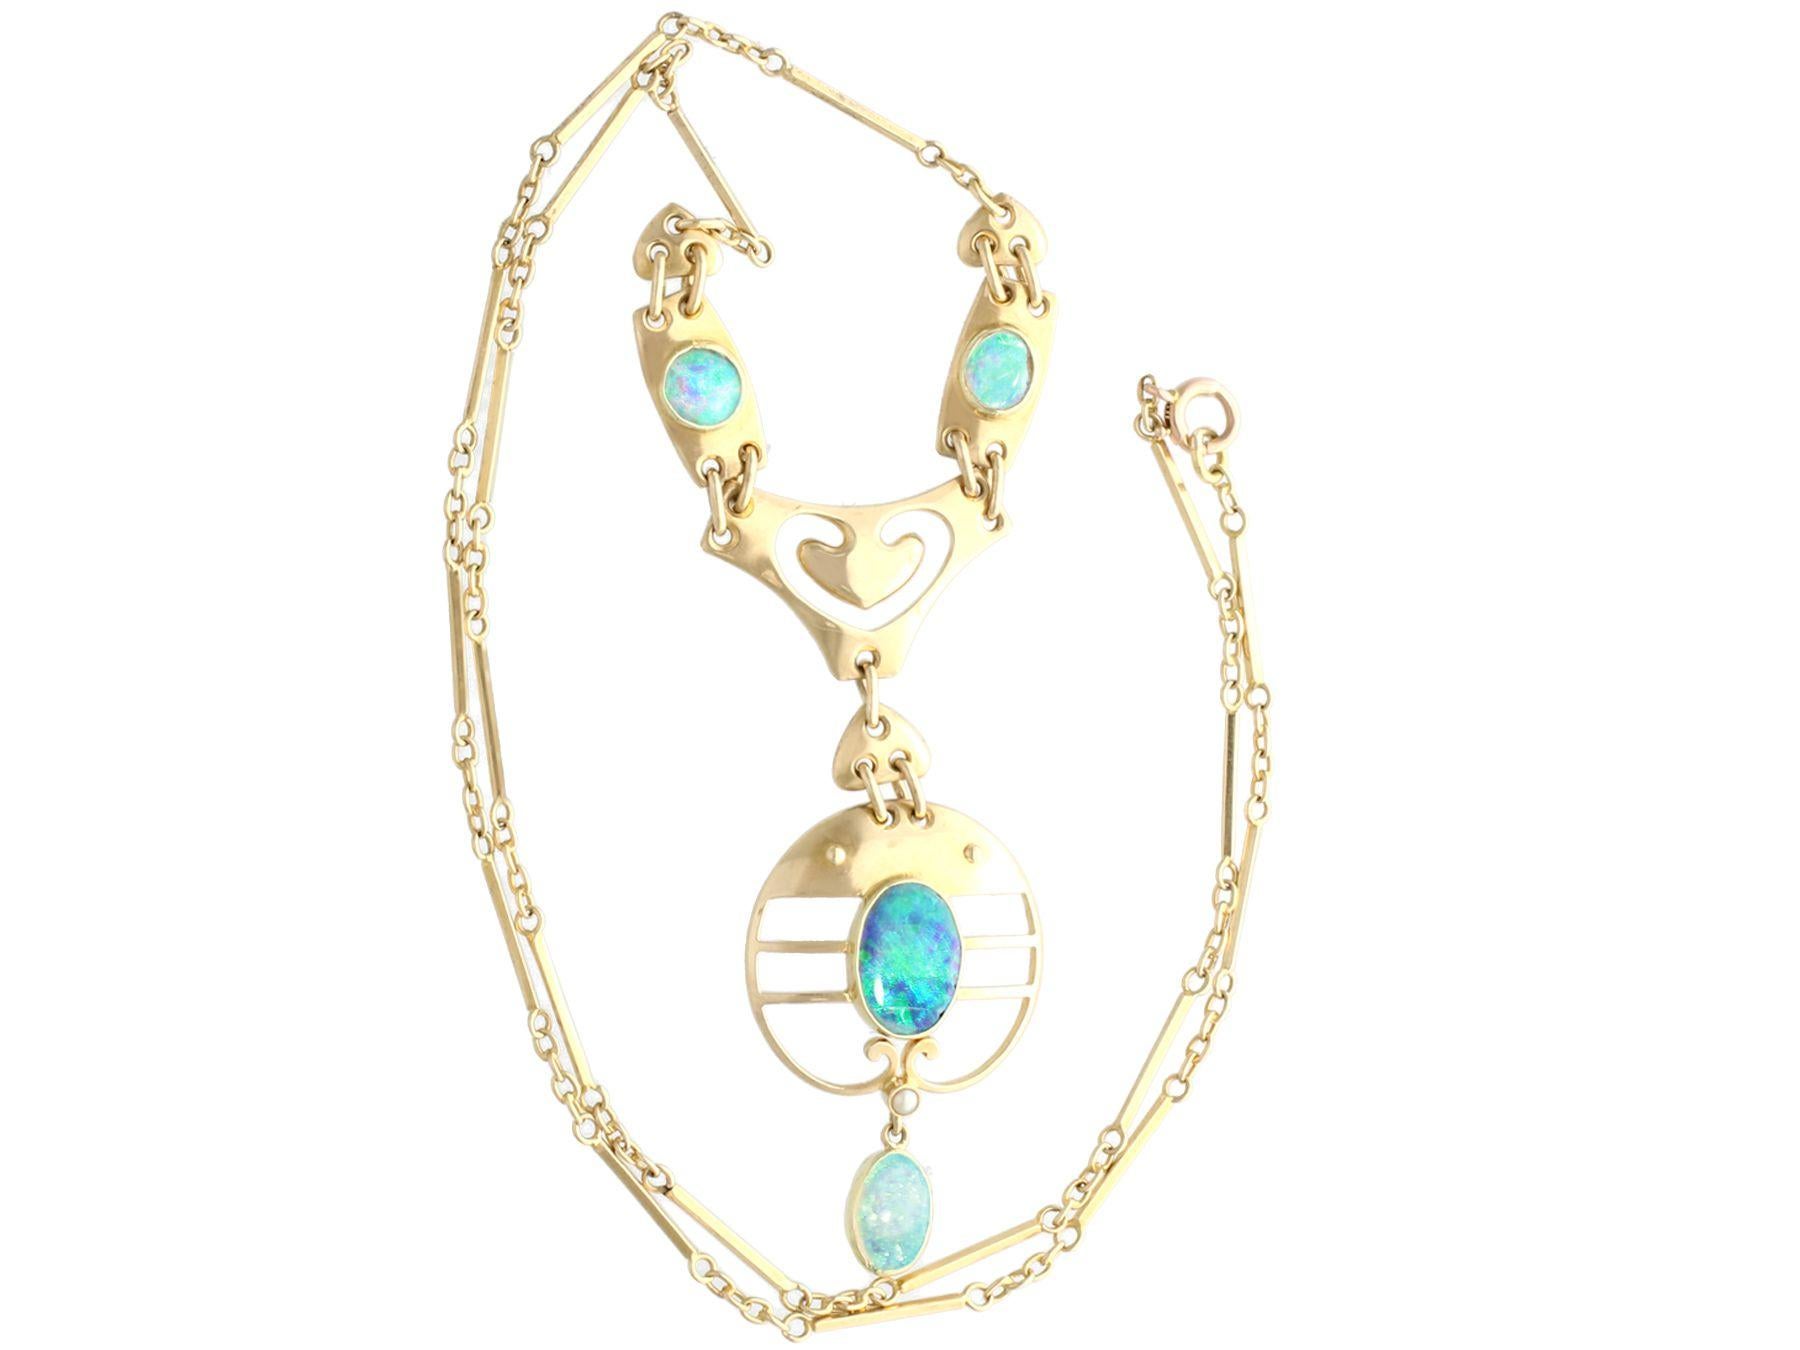 A fine and impressive antique Art Nouveau 2.62 carat opal and 15 karat yellow gold necklace made by Murrle Bennet & Co; part of our diverse antique jewelry and estate jewelry collections

This fine and impressive antique necklace has been crafted in